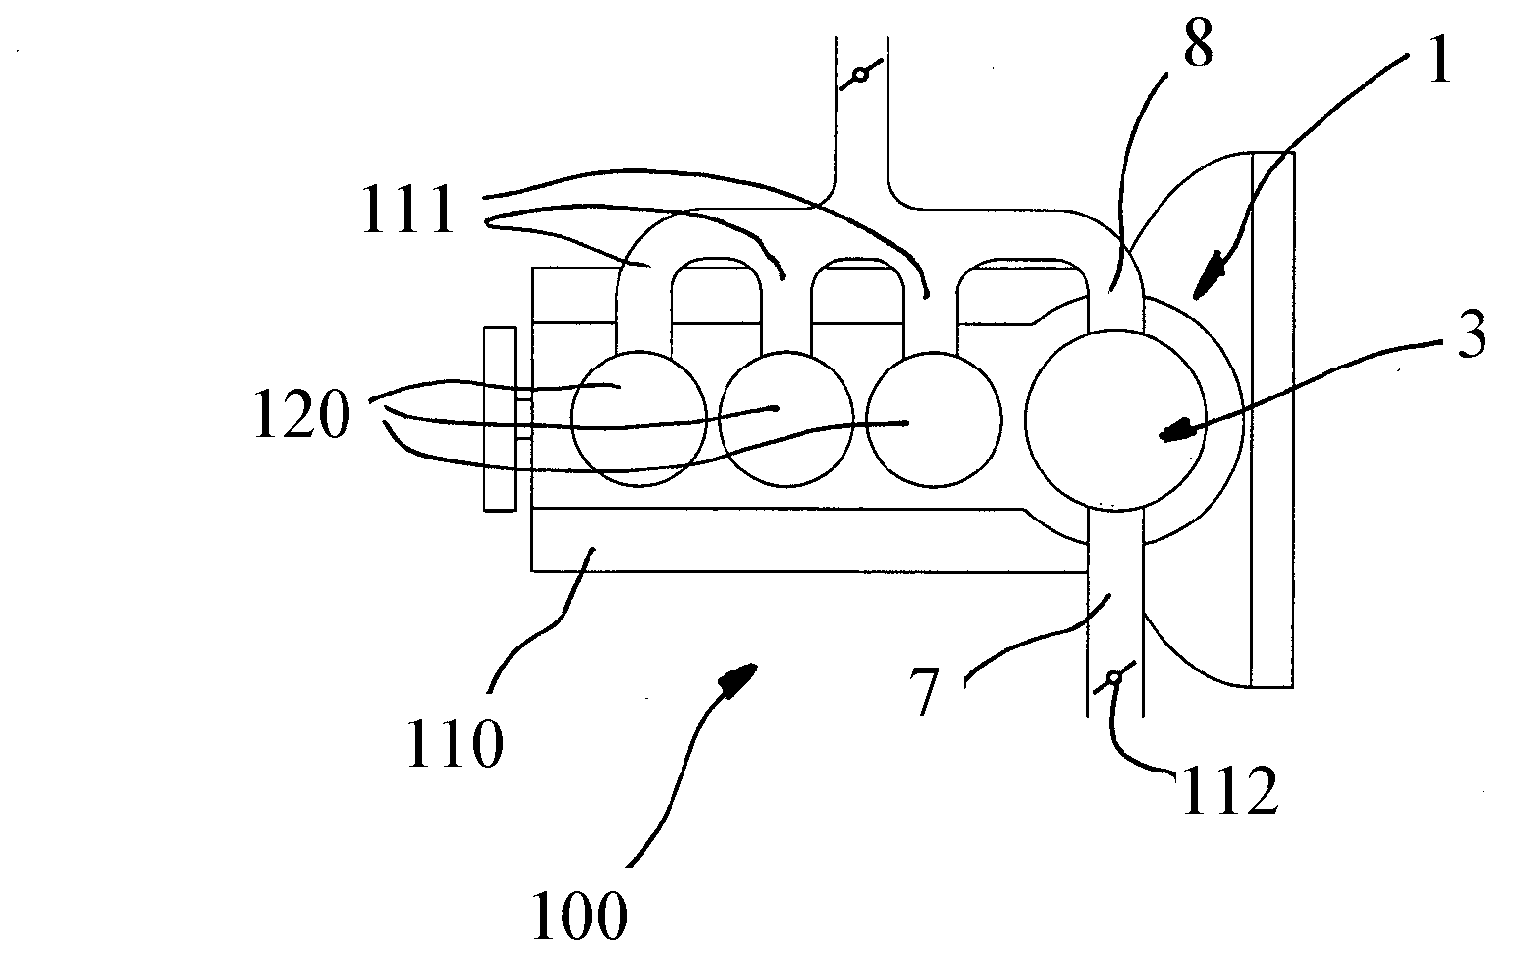 Double-acting piston compressor guided by a roller and driven by a gearwheel and racks